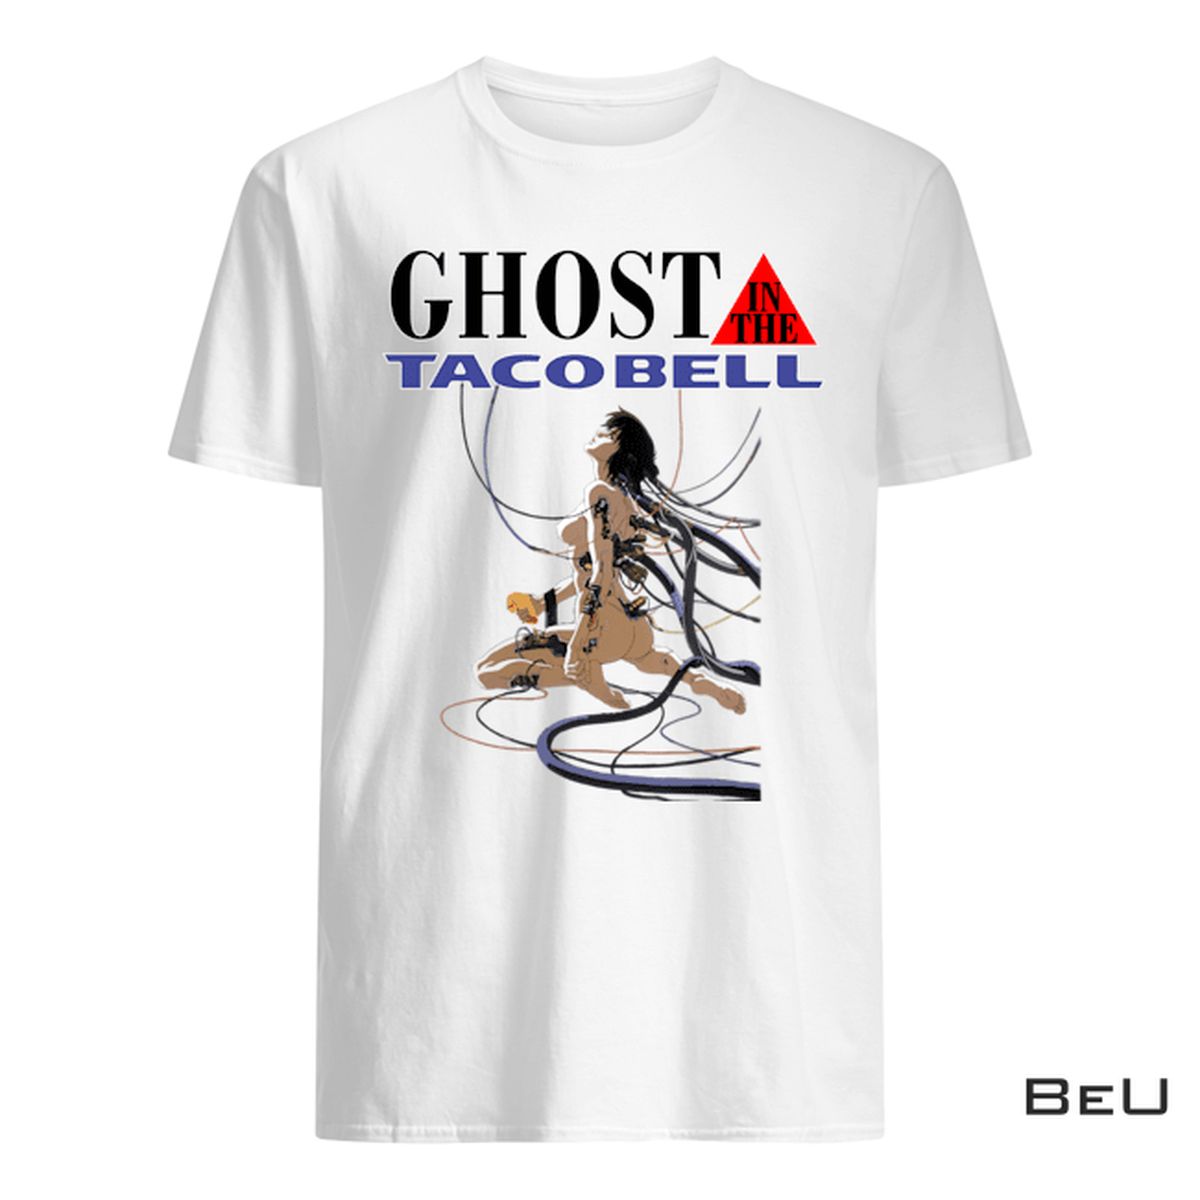 Ghost In The Shell Ghost In The Taco Bell Shirt